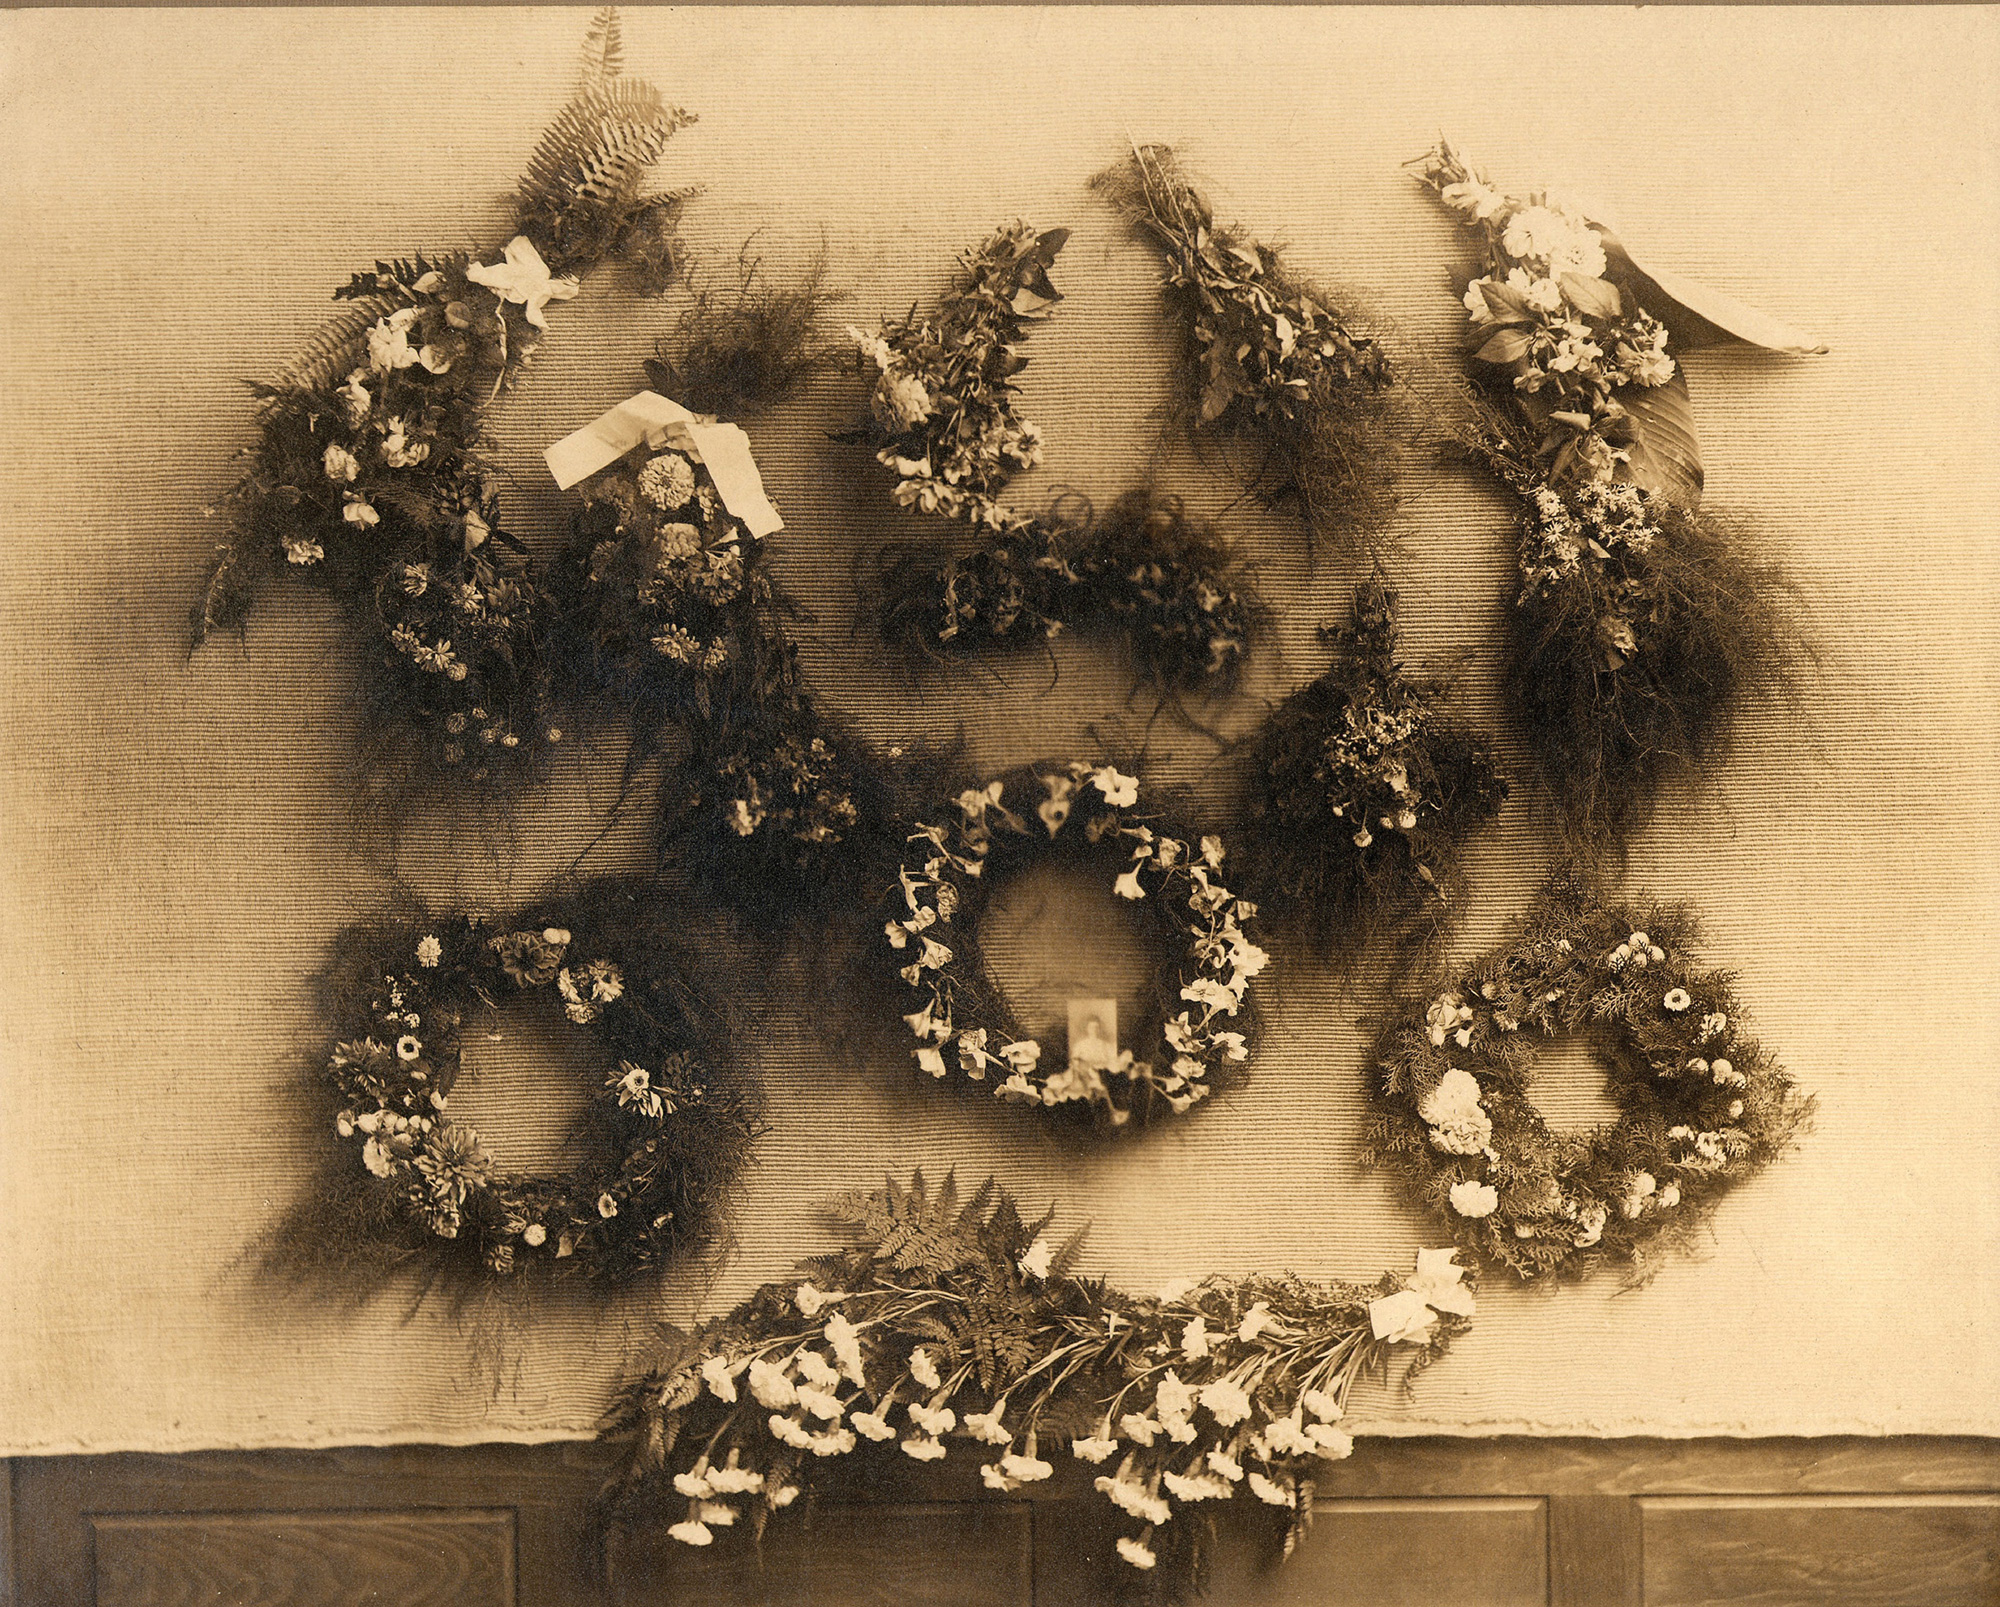 Sepia photograph of floral wreaths.